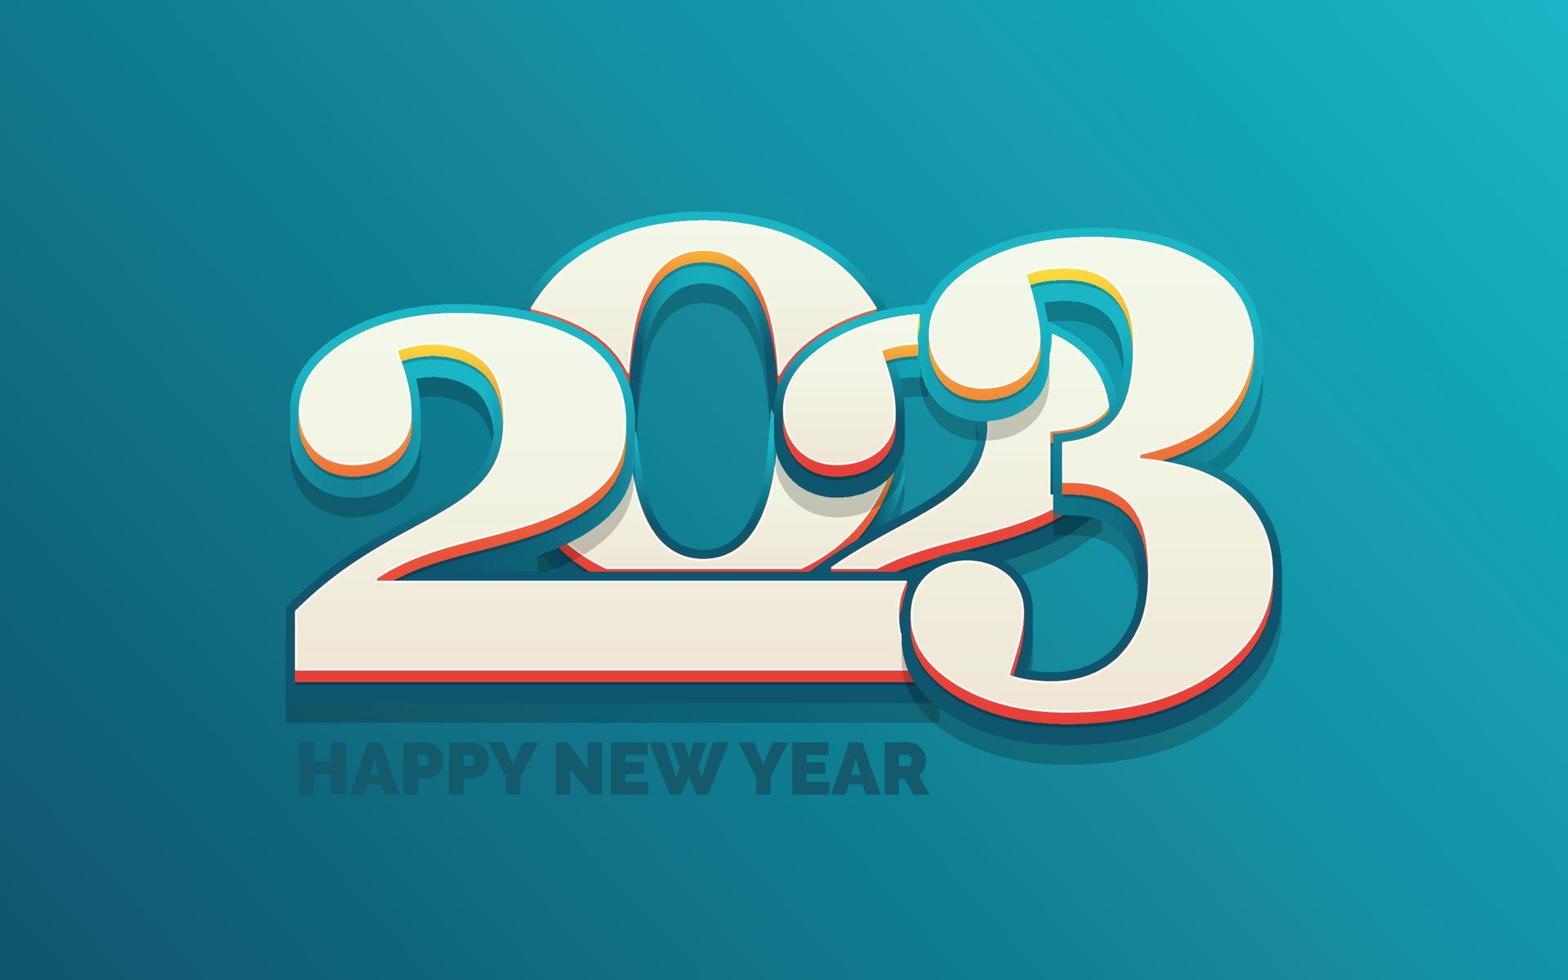 Happy new year 2023 White background Text logo design vector